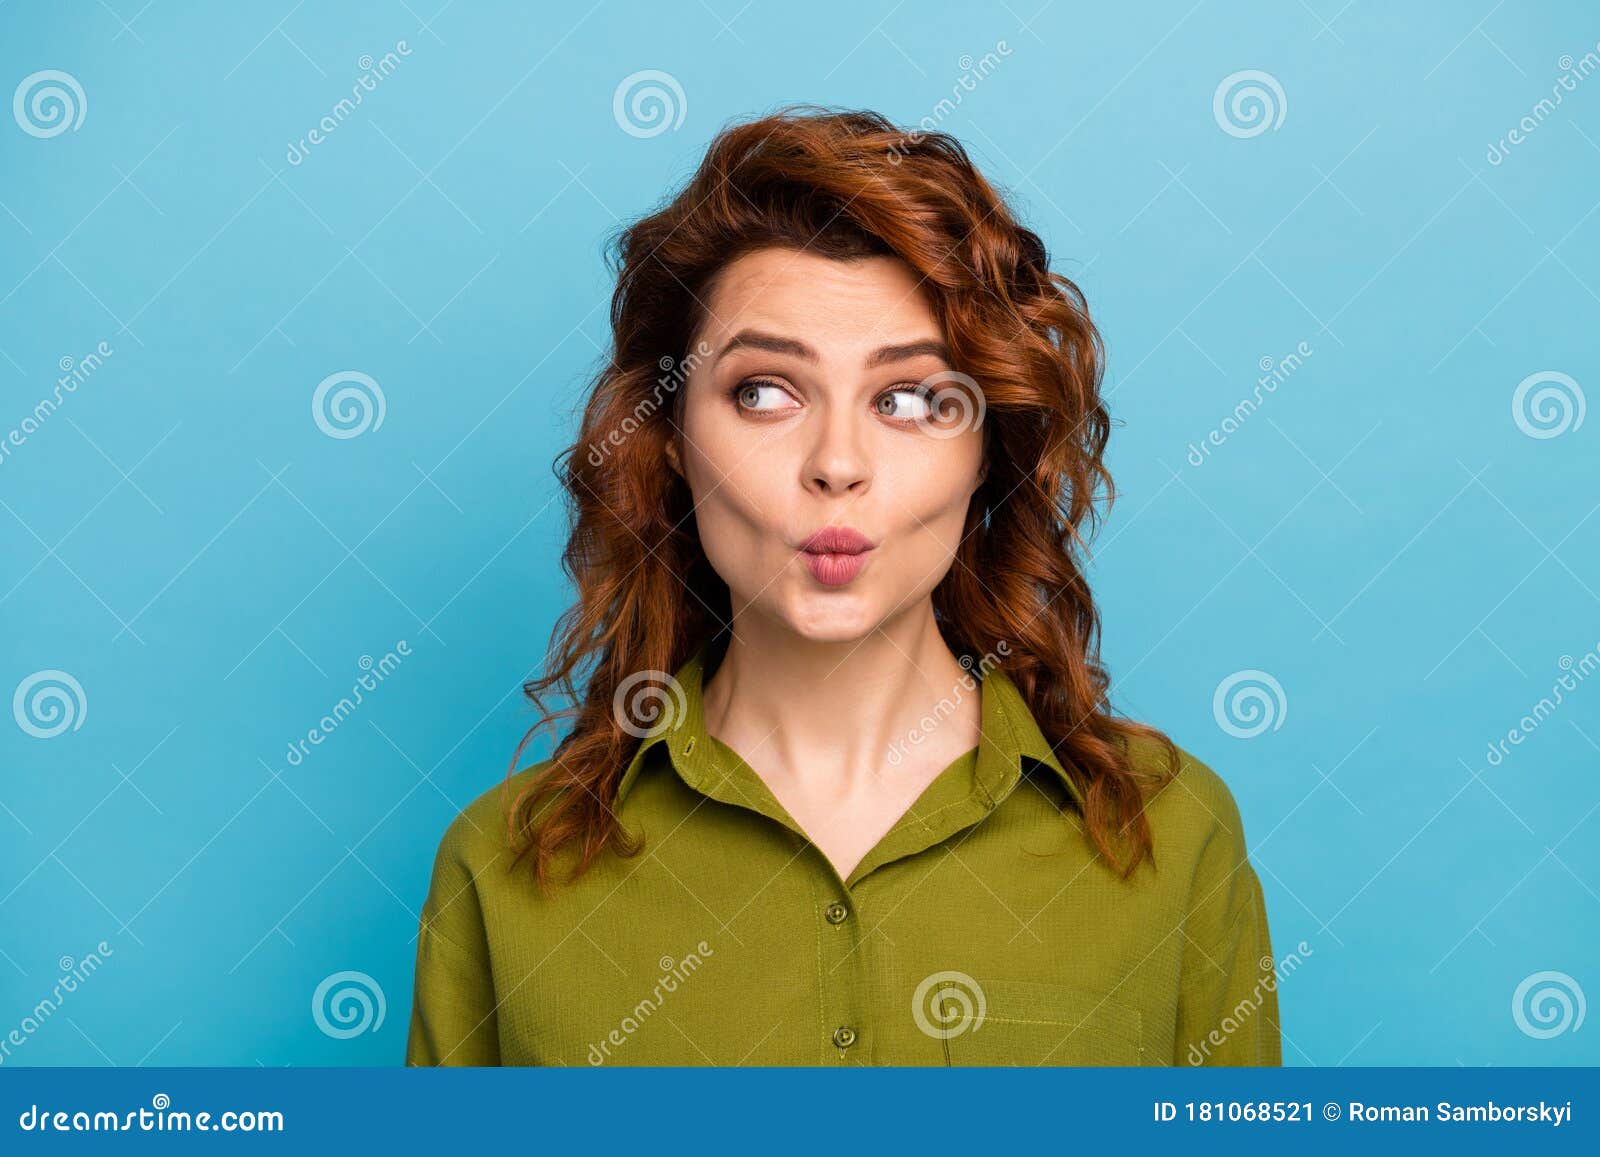 Portrait of Lovely Charming Woman Look Copyspace Want Attract Cute Guy Send  14-february Air Kiss Wear Trendy Outfit Stock Image - Image of face, dream:  181068521